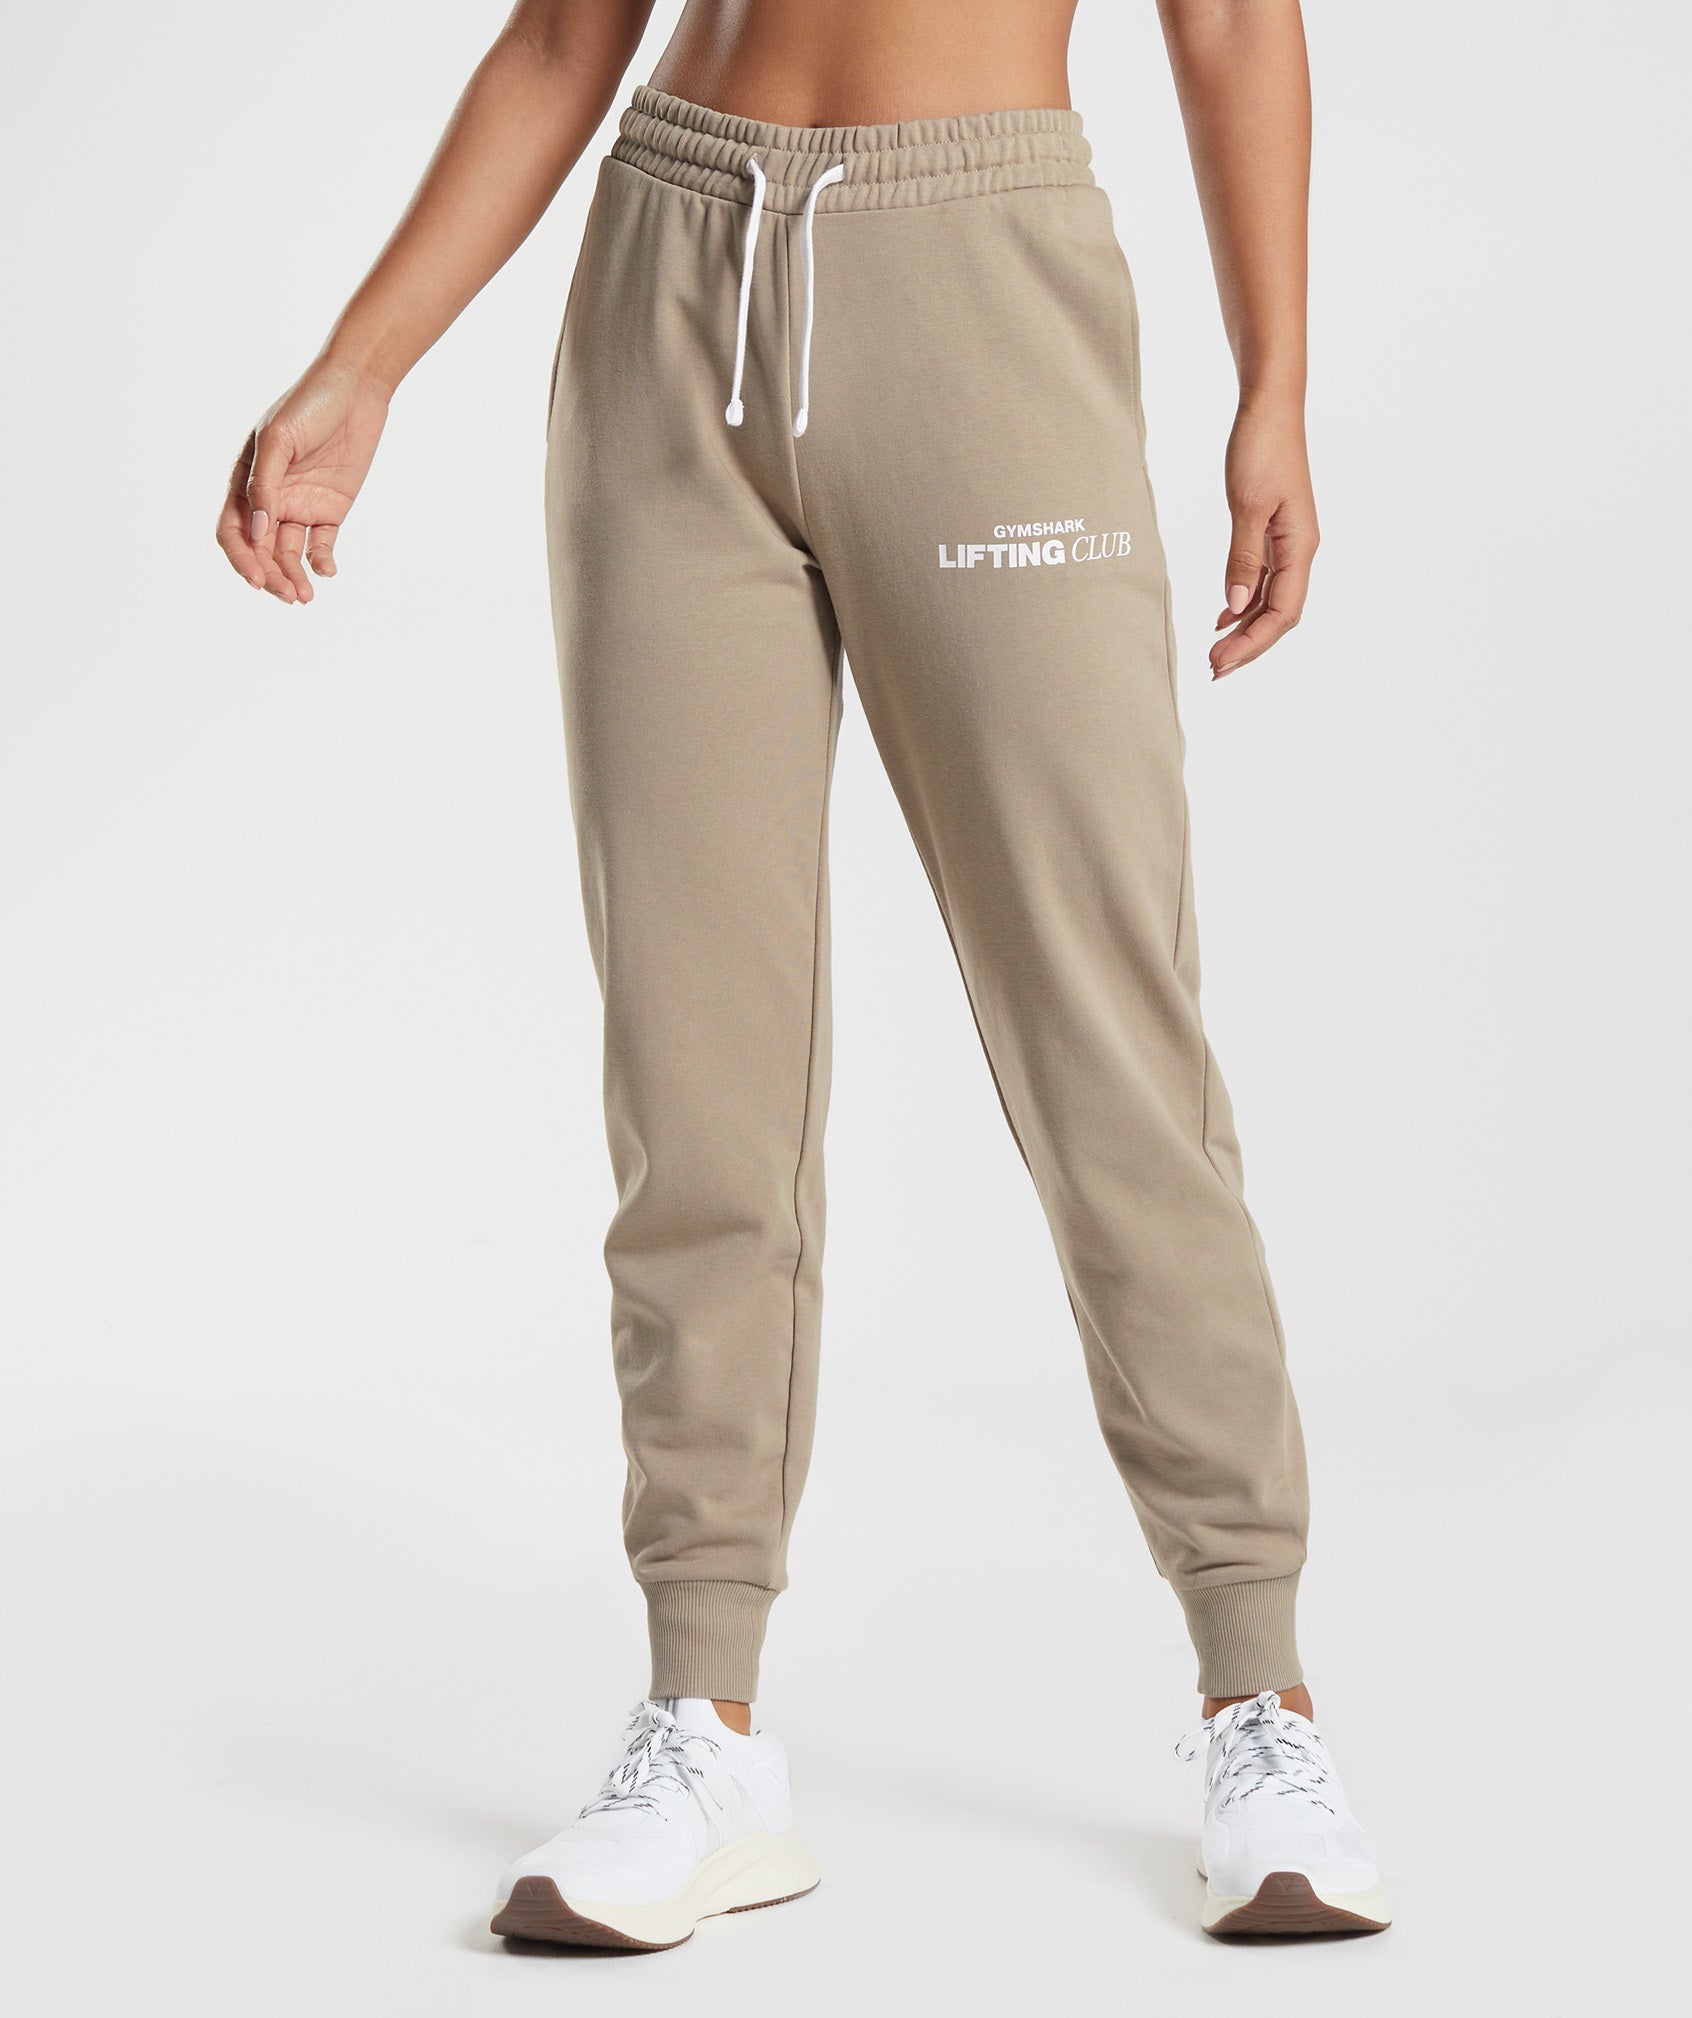 Social Club Joggers in Cement Brown - view 1